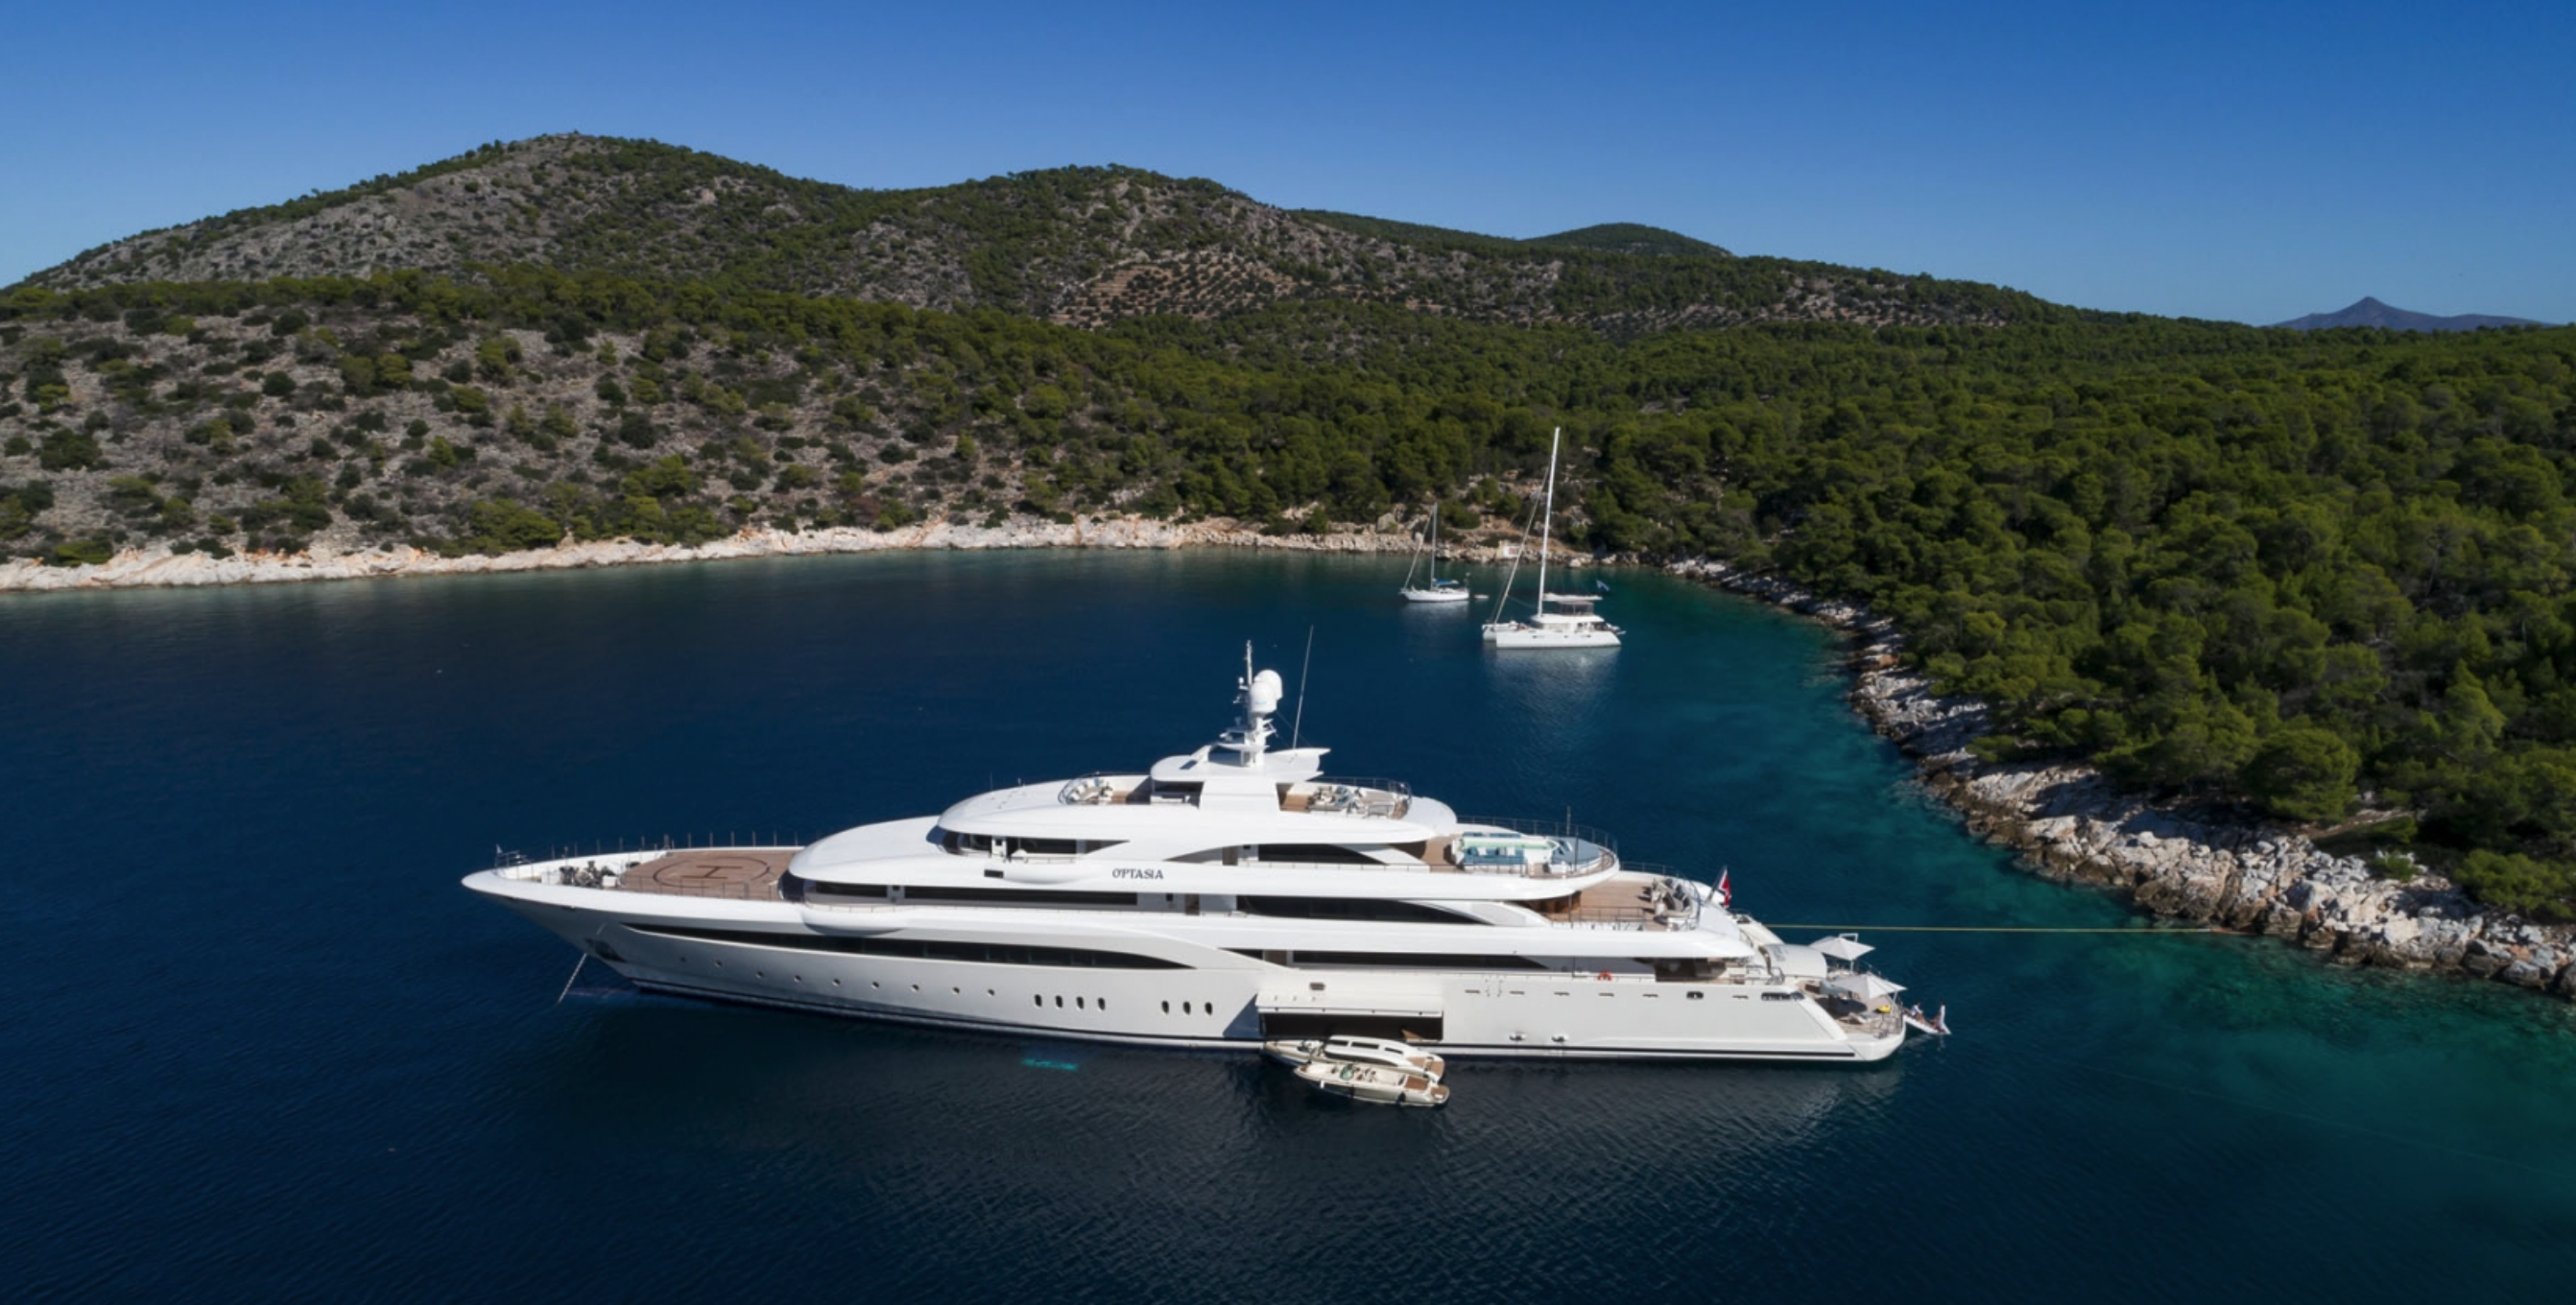 O’Ptasia - Yacht Charter Milna & Boat hire in East Mediterranean 1